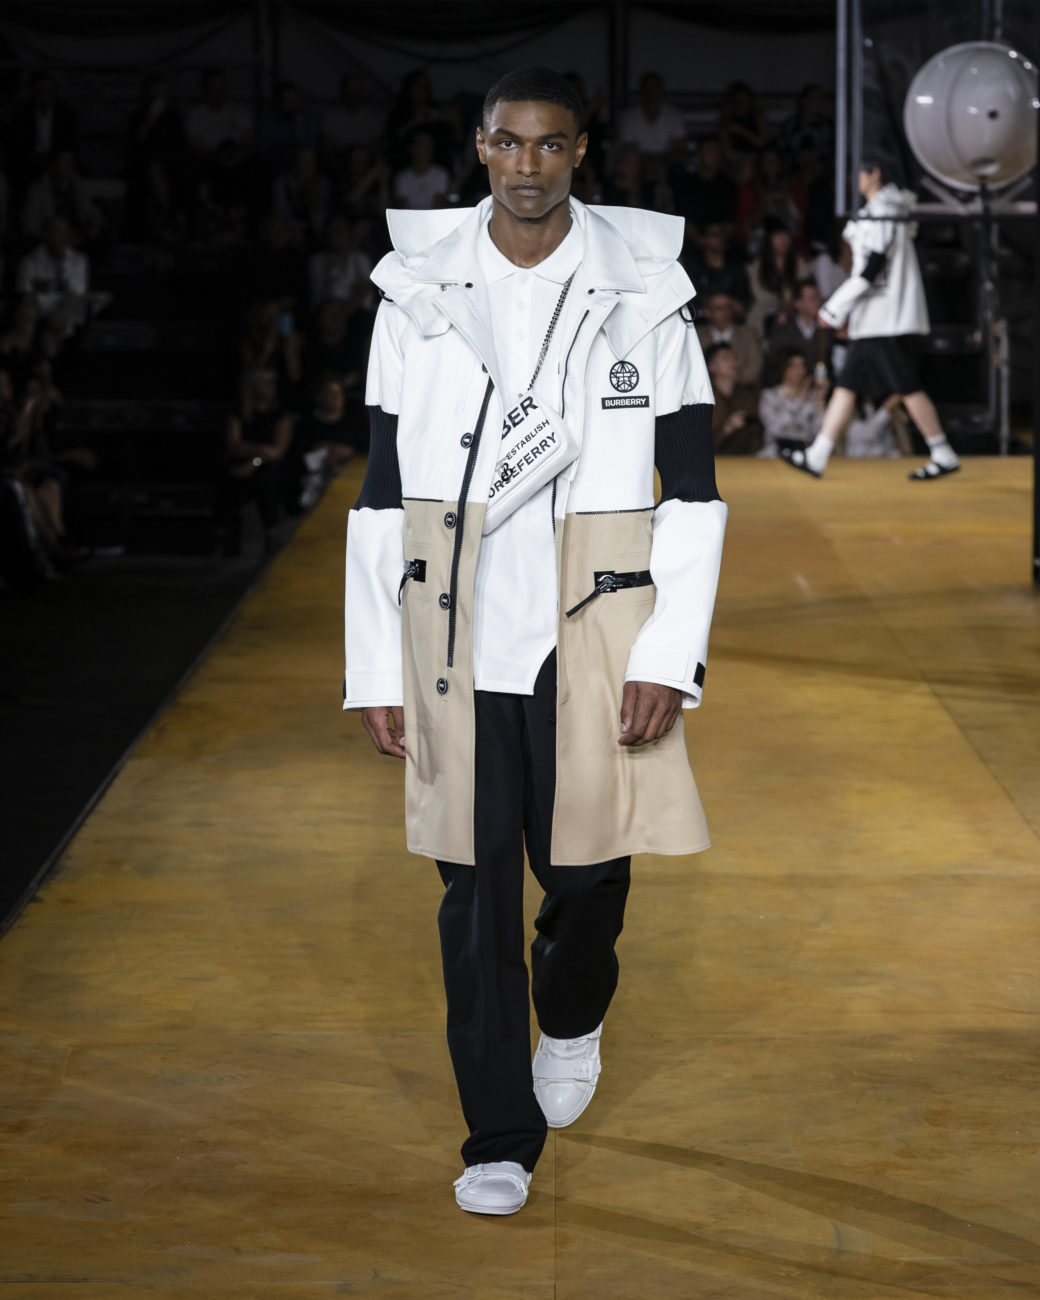 Burberry Spring Summer 2020 Collection, Courtesy of Burberry